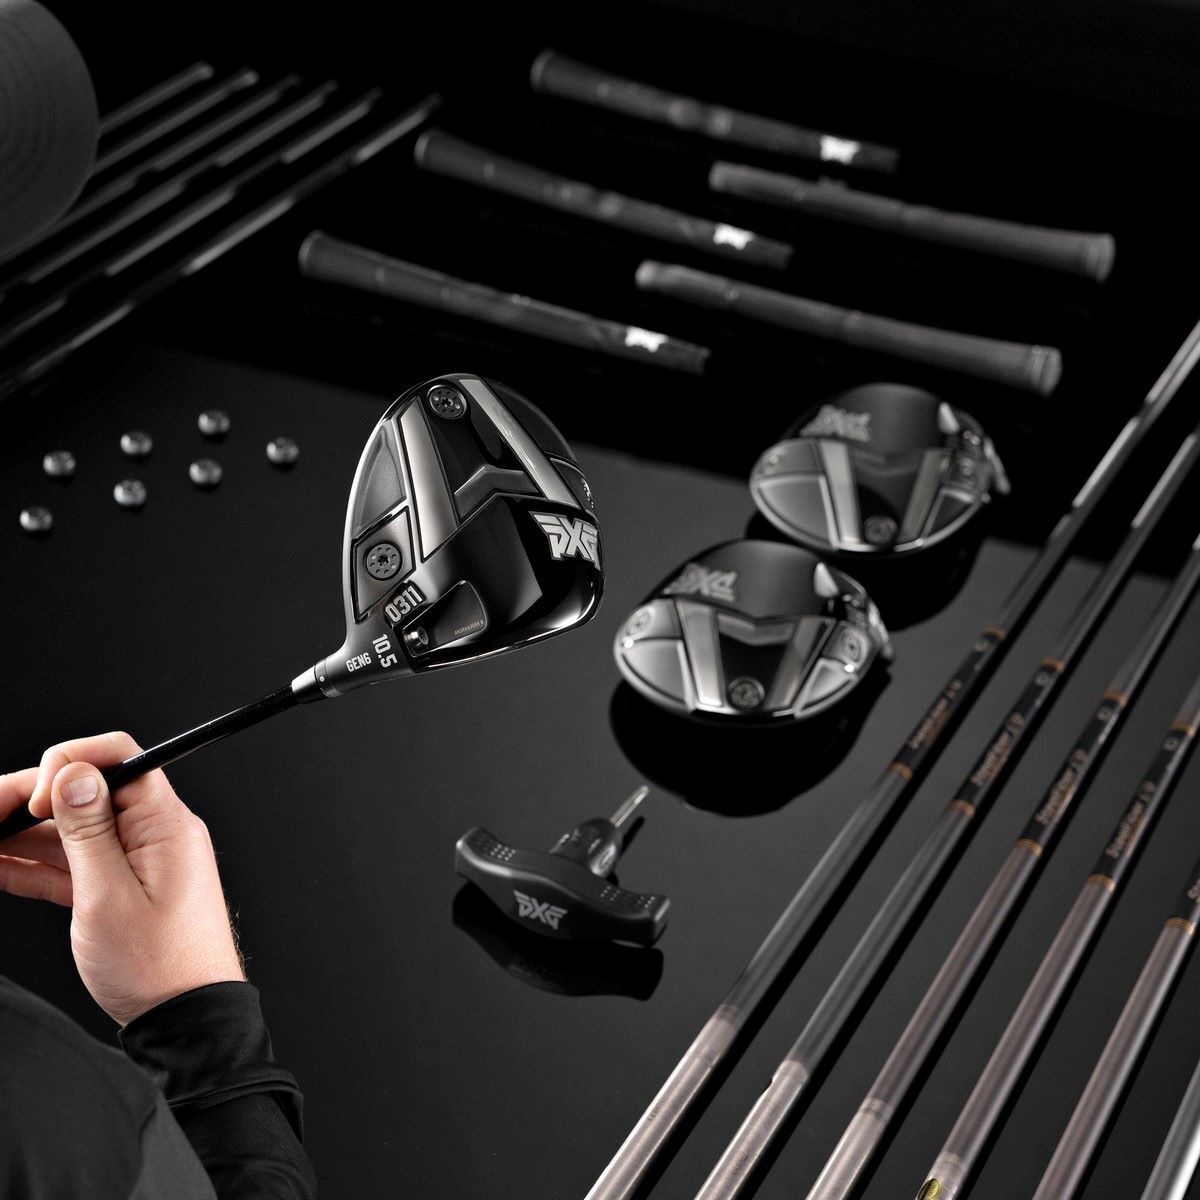 Get Fit The PXG Way Premium Golf Club Fittings PXG